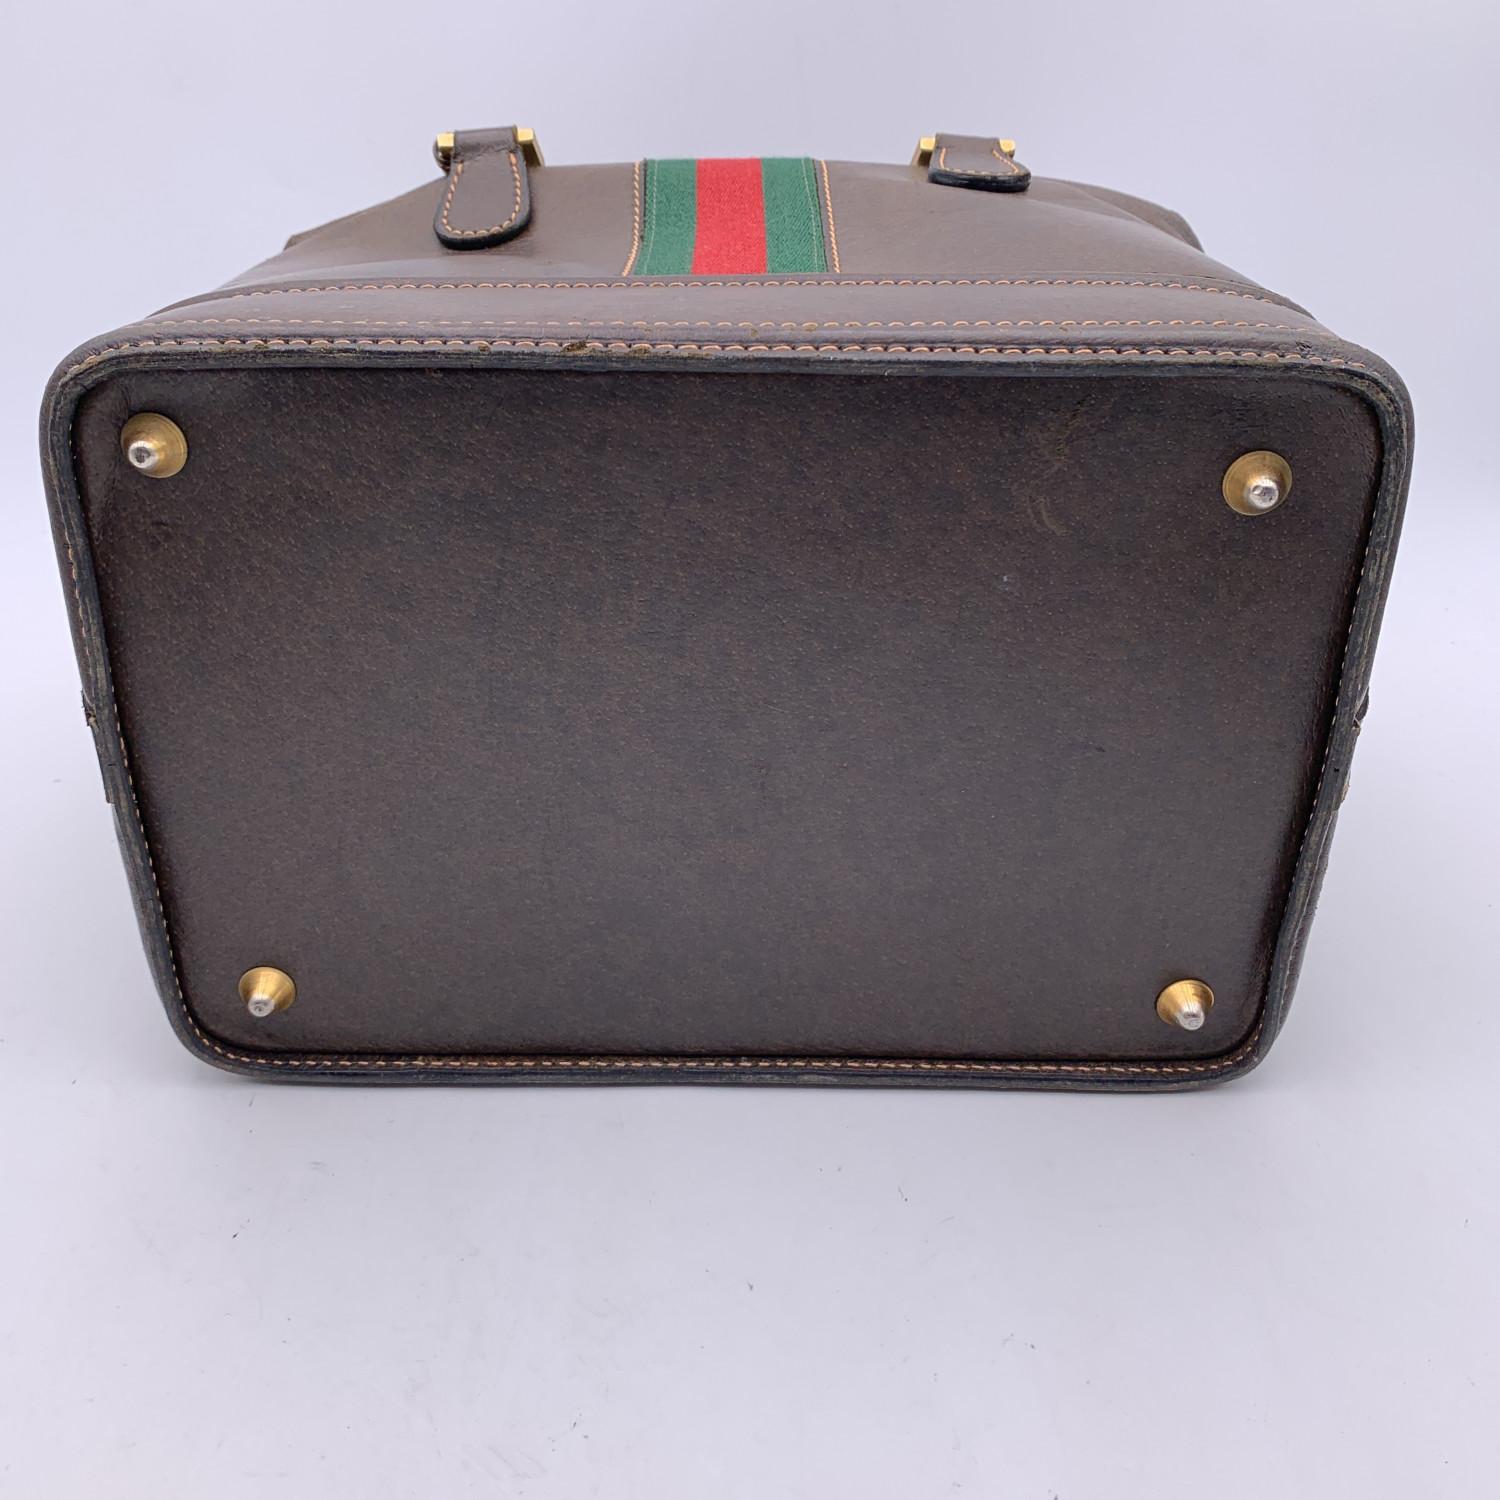 Gucci Vintage Brown Leather Travel Bag Train Case with Stripes 3